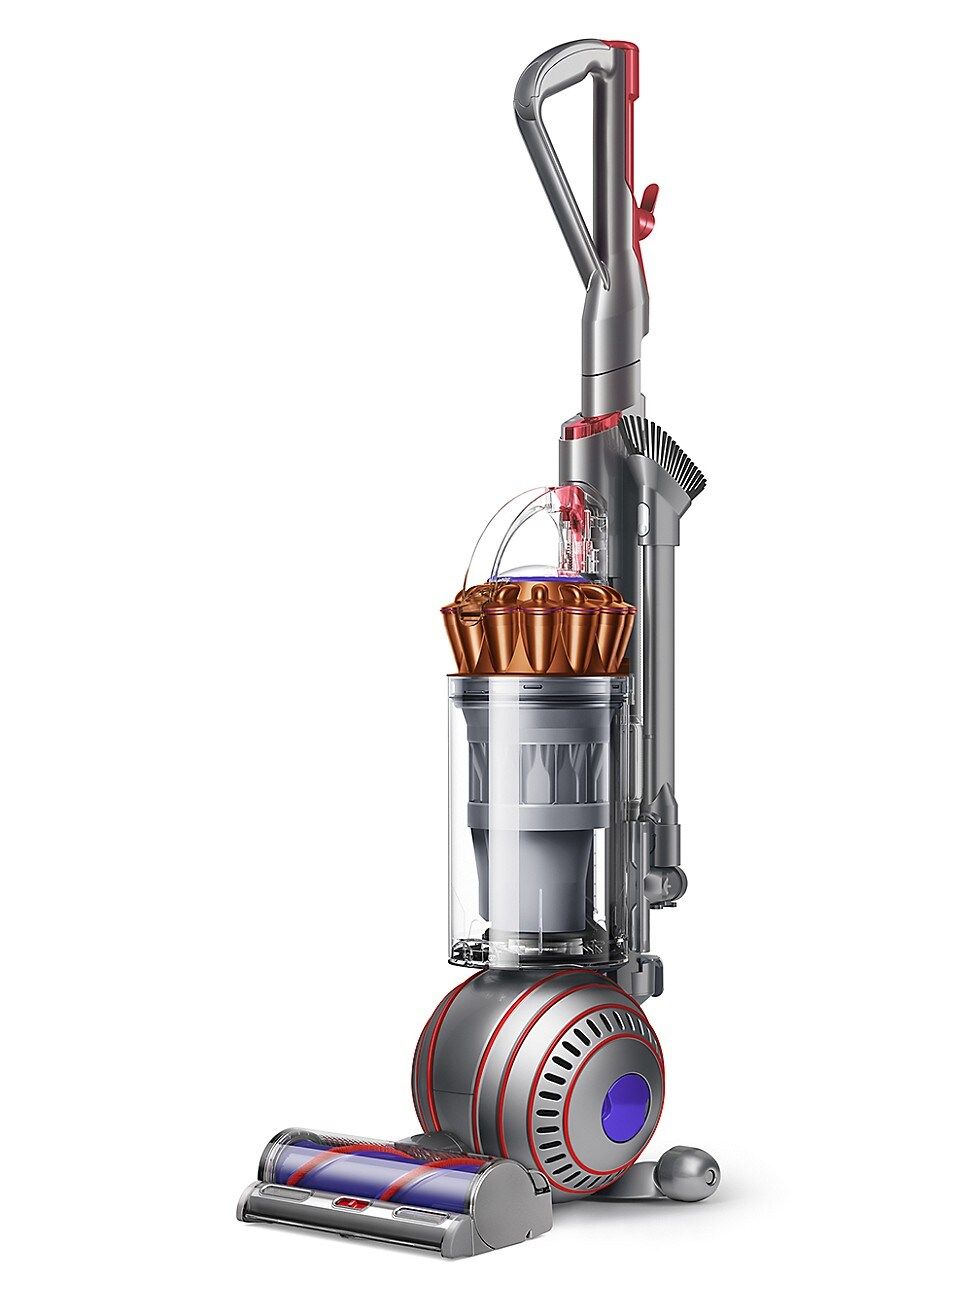 Ball Animal 3 Extra Upright Vacuum - Copper Silver | Saks Fifth Avenue